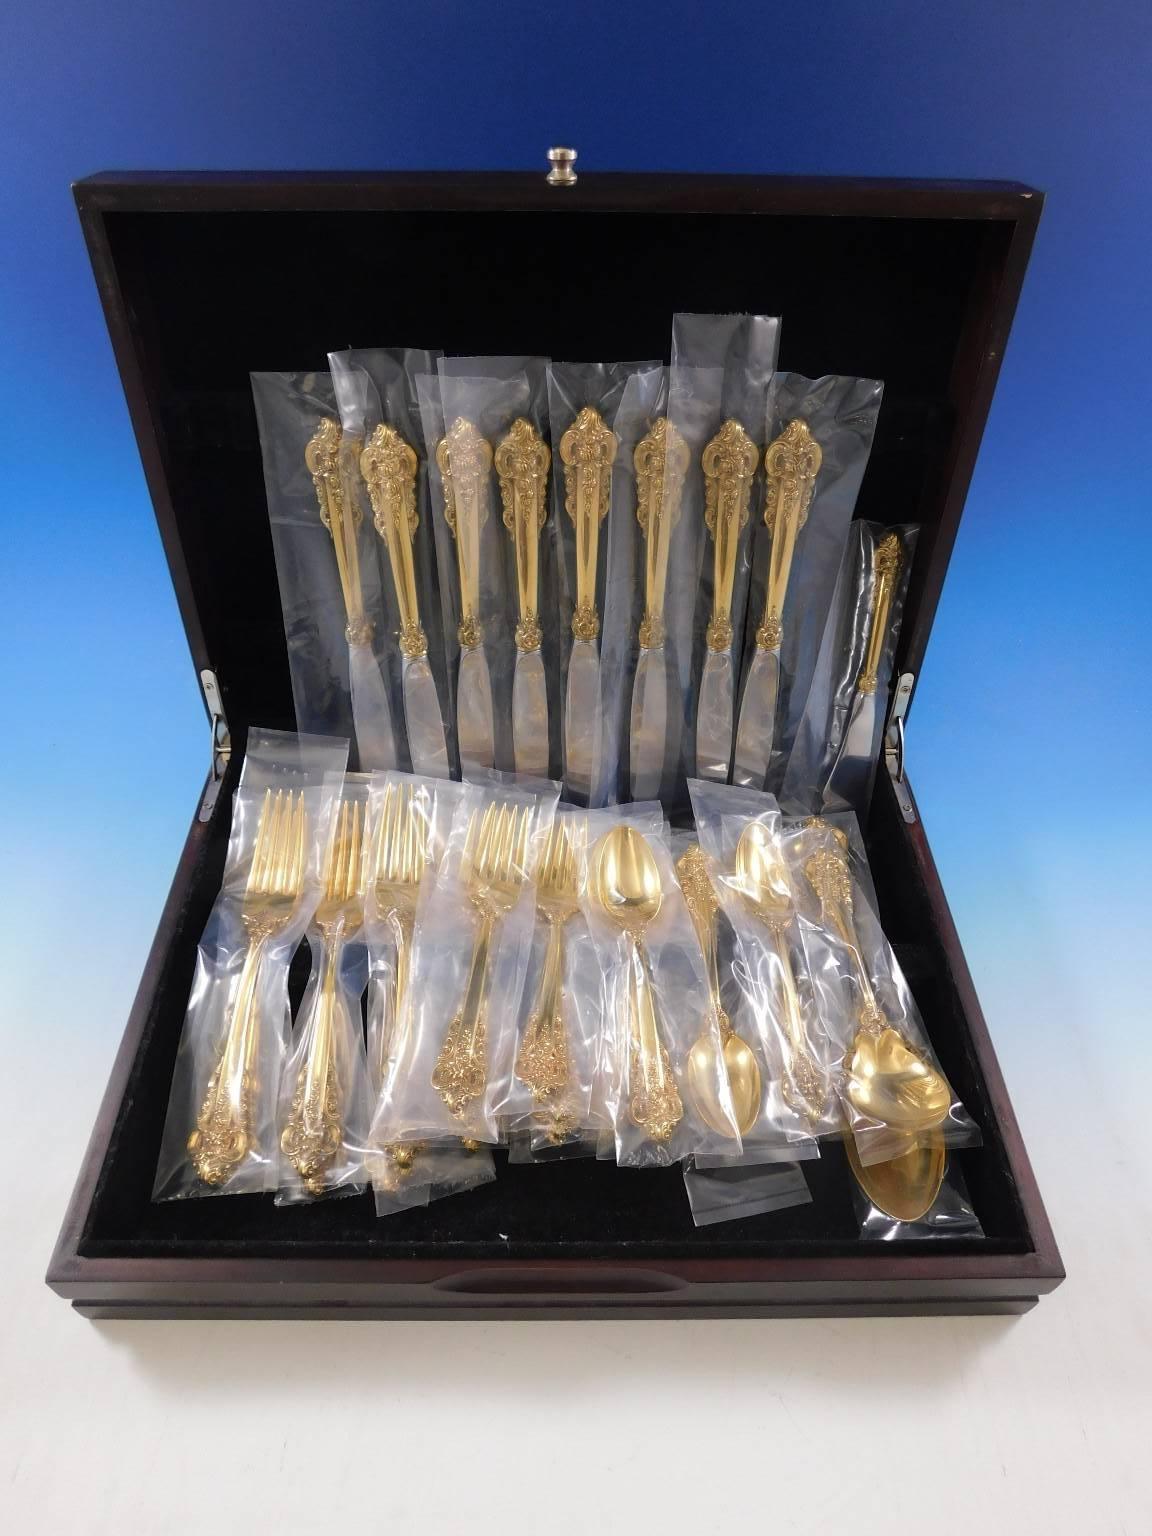 Beautiful Vermeil (completely gold-washed) Grande Baroque by Wallace sterling silver flatware set of 35 pieces. This set includes:

Eight regular knives, 8 7/8